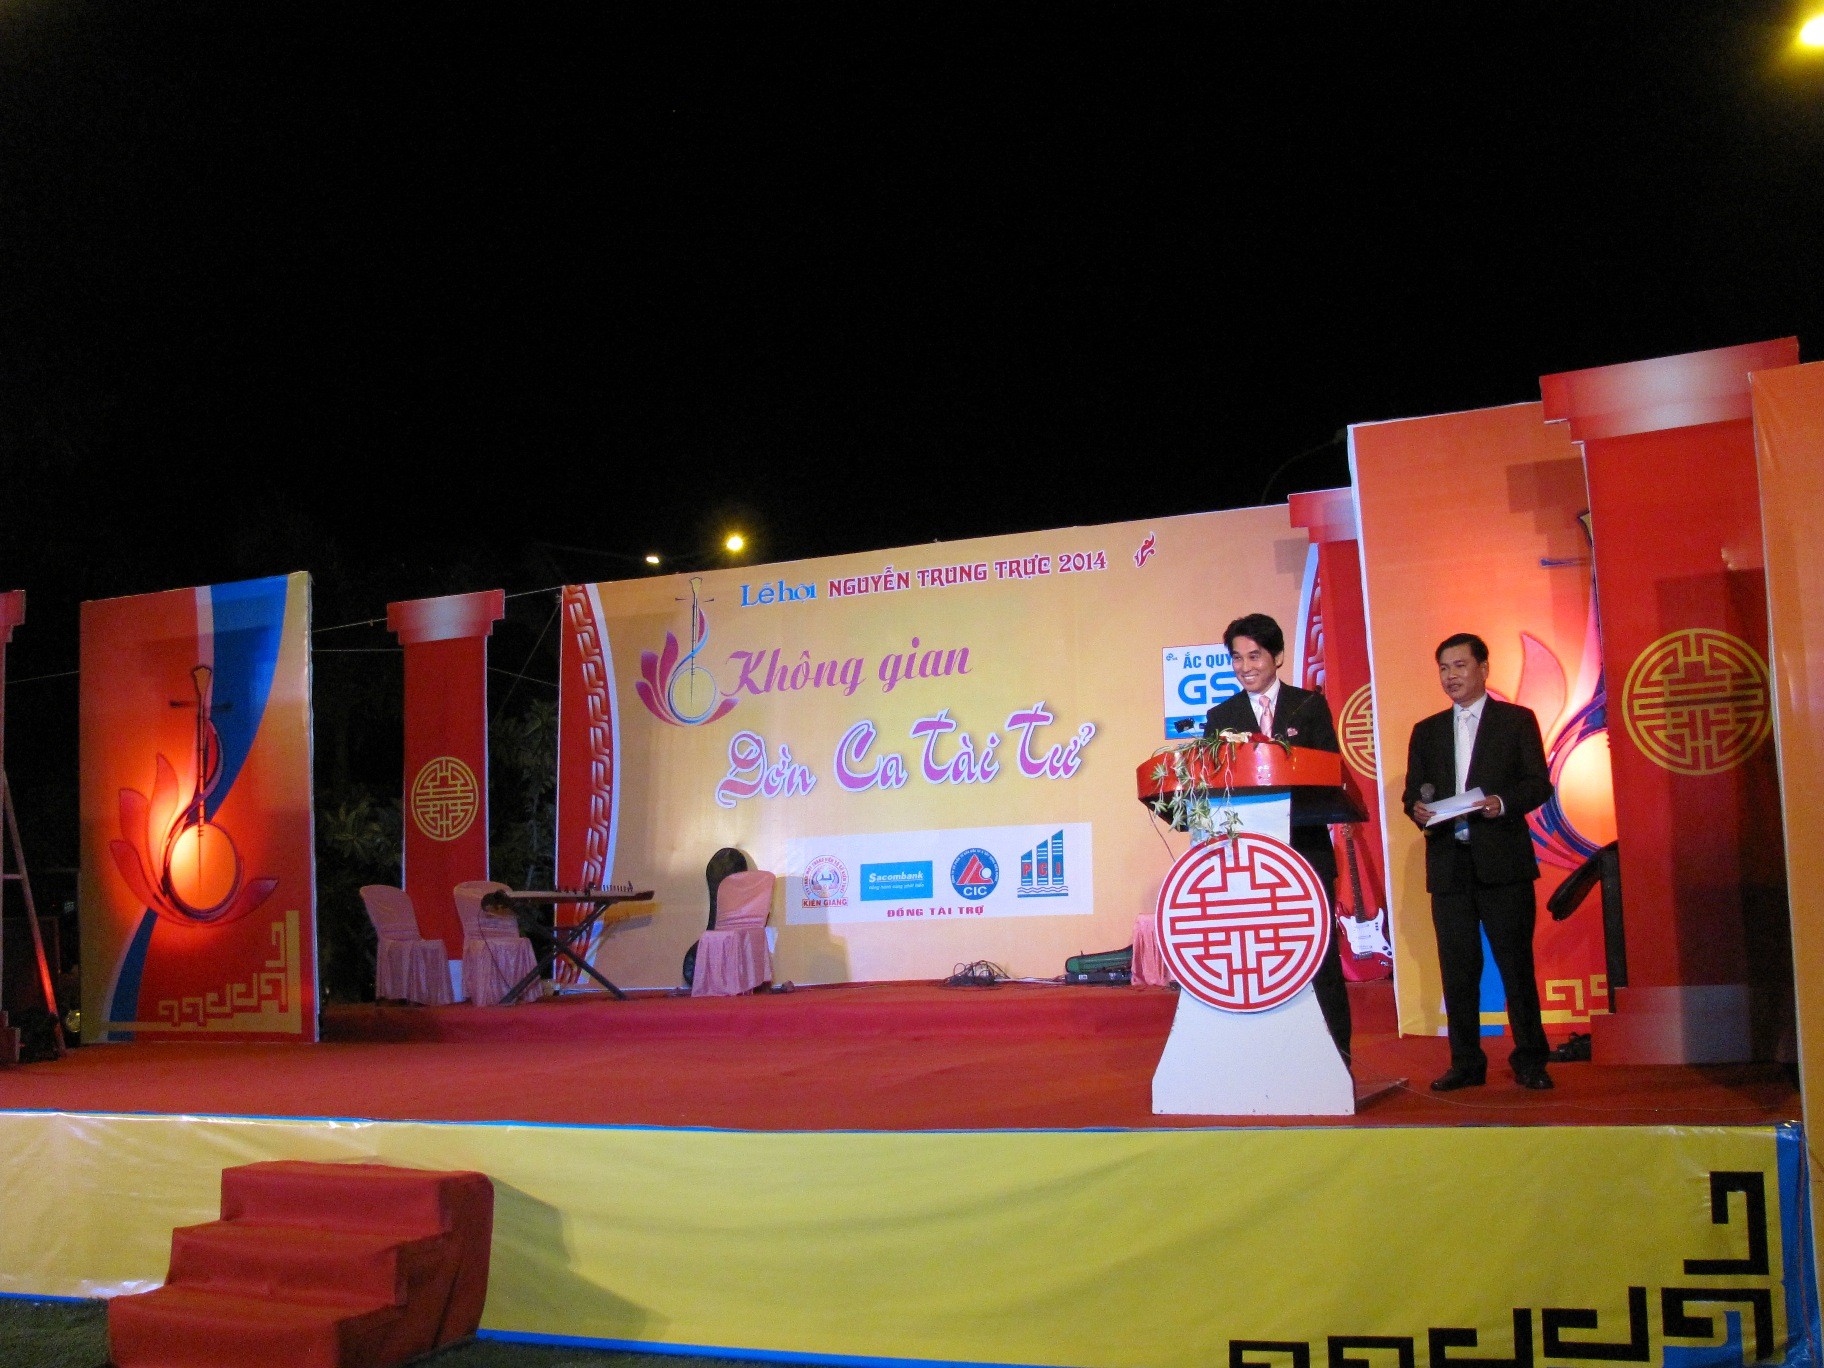 GSV HELD EVENT FREE “TAKE CARE, CONSULT & MAINTENANCE BATTERY OF MOTORBIKE” IN KIEN GIANG